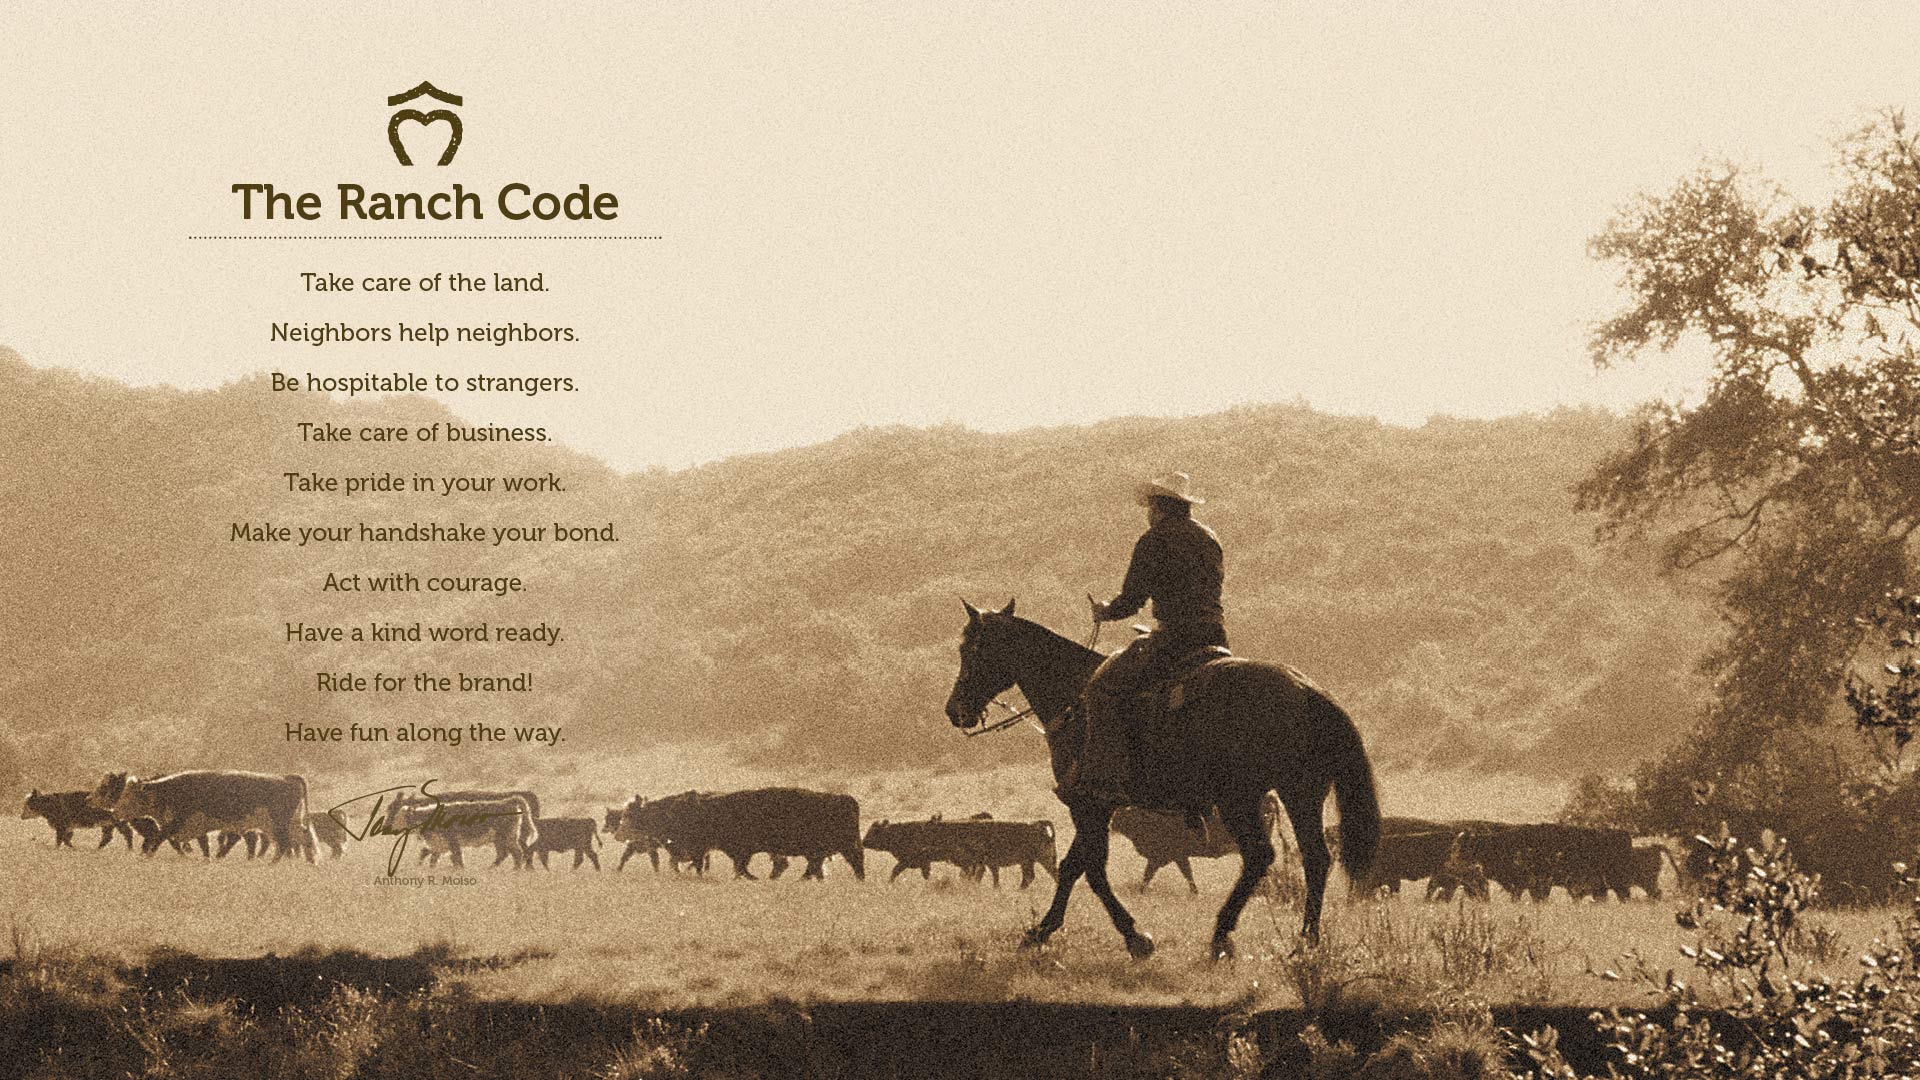 The Ranch Code